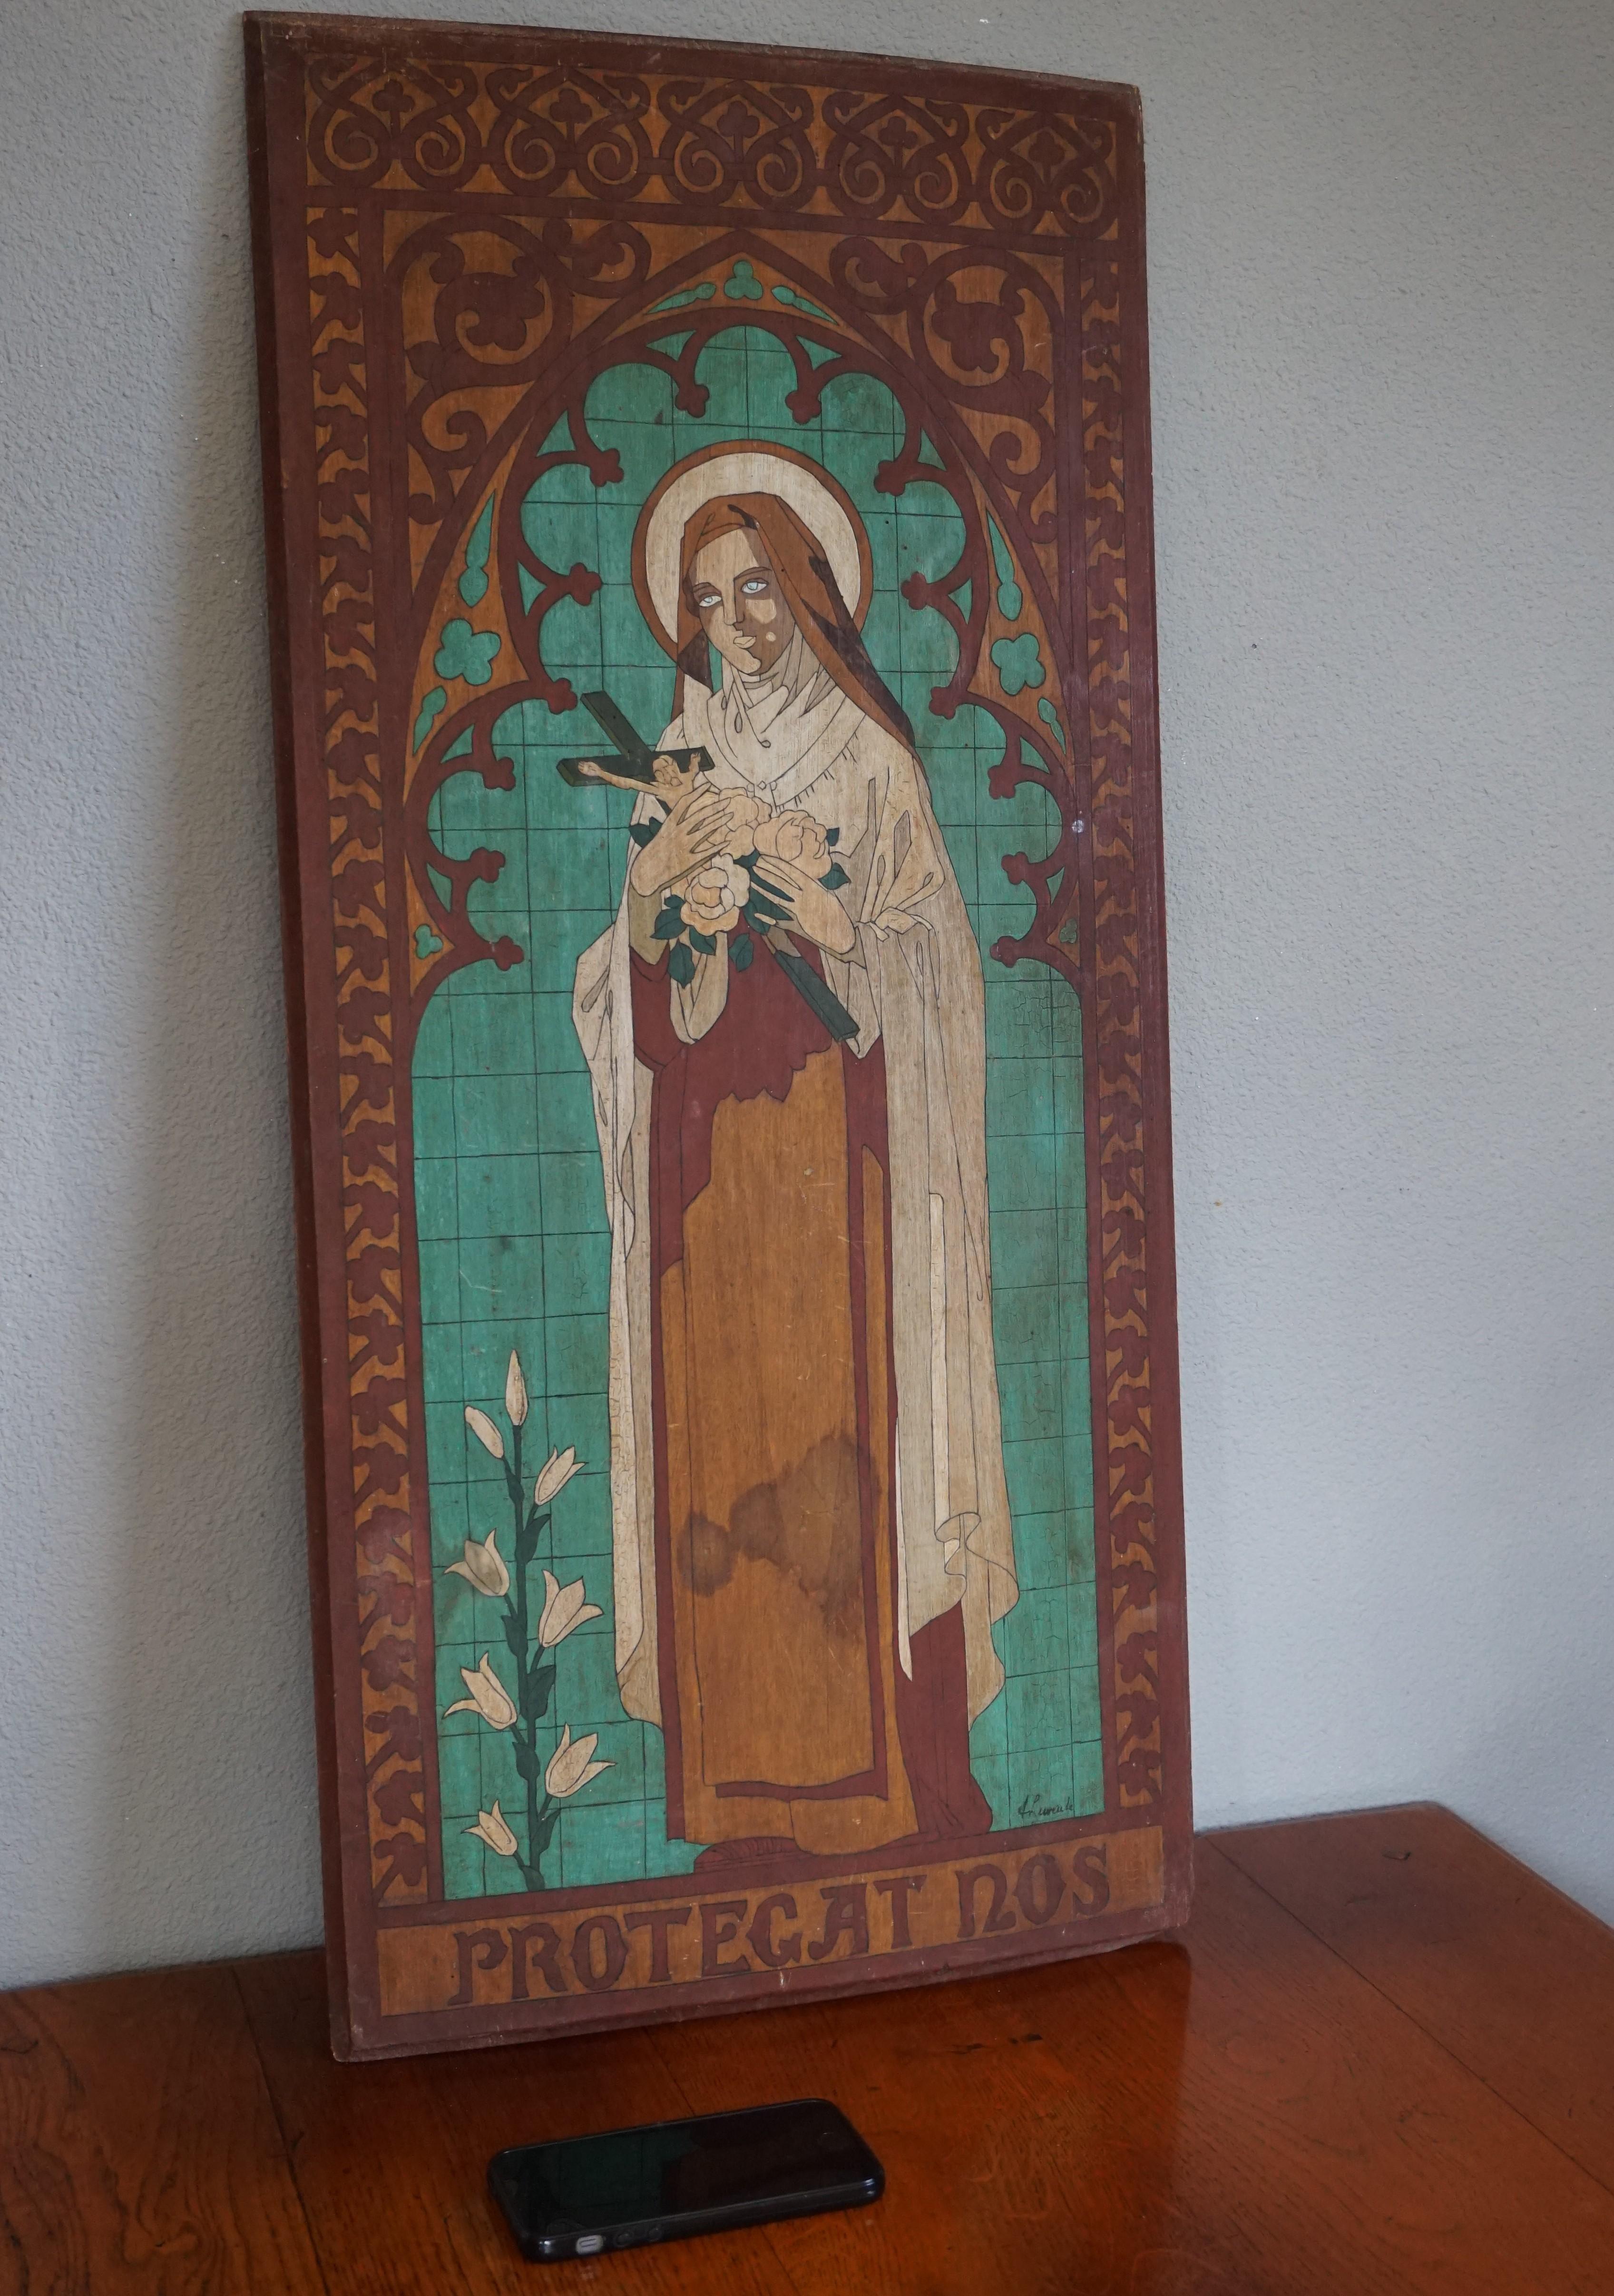 One of a kind, hand painted and signed work of religious art with a Latin phrase.

Saint Thérèse of Lisieux (1873-1897) is the patron saint of France and she is also known as Saint Thérèse of the Child Jesus and the Holy Face. She is popularly